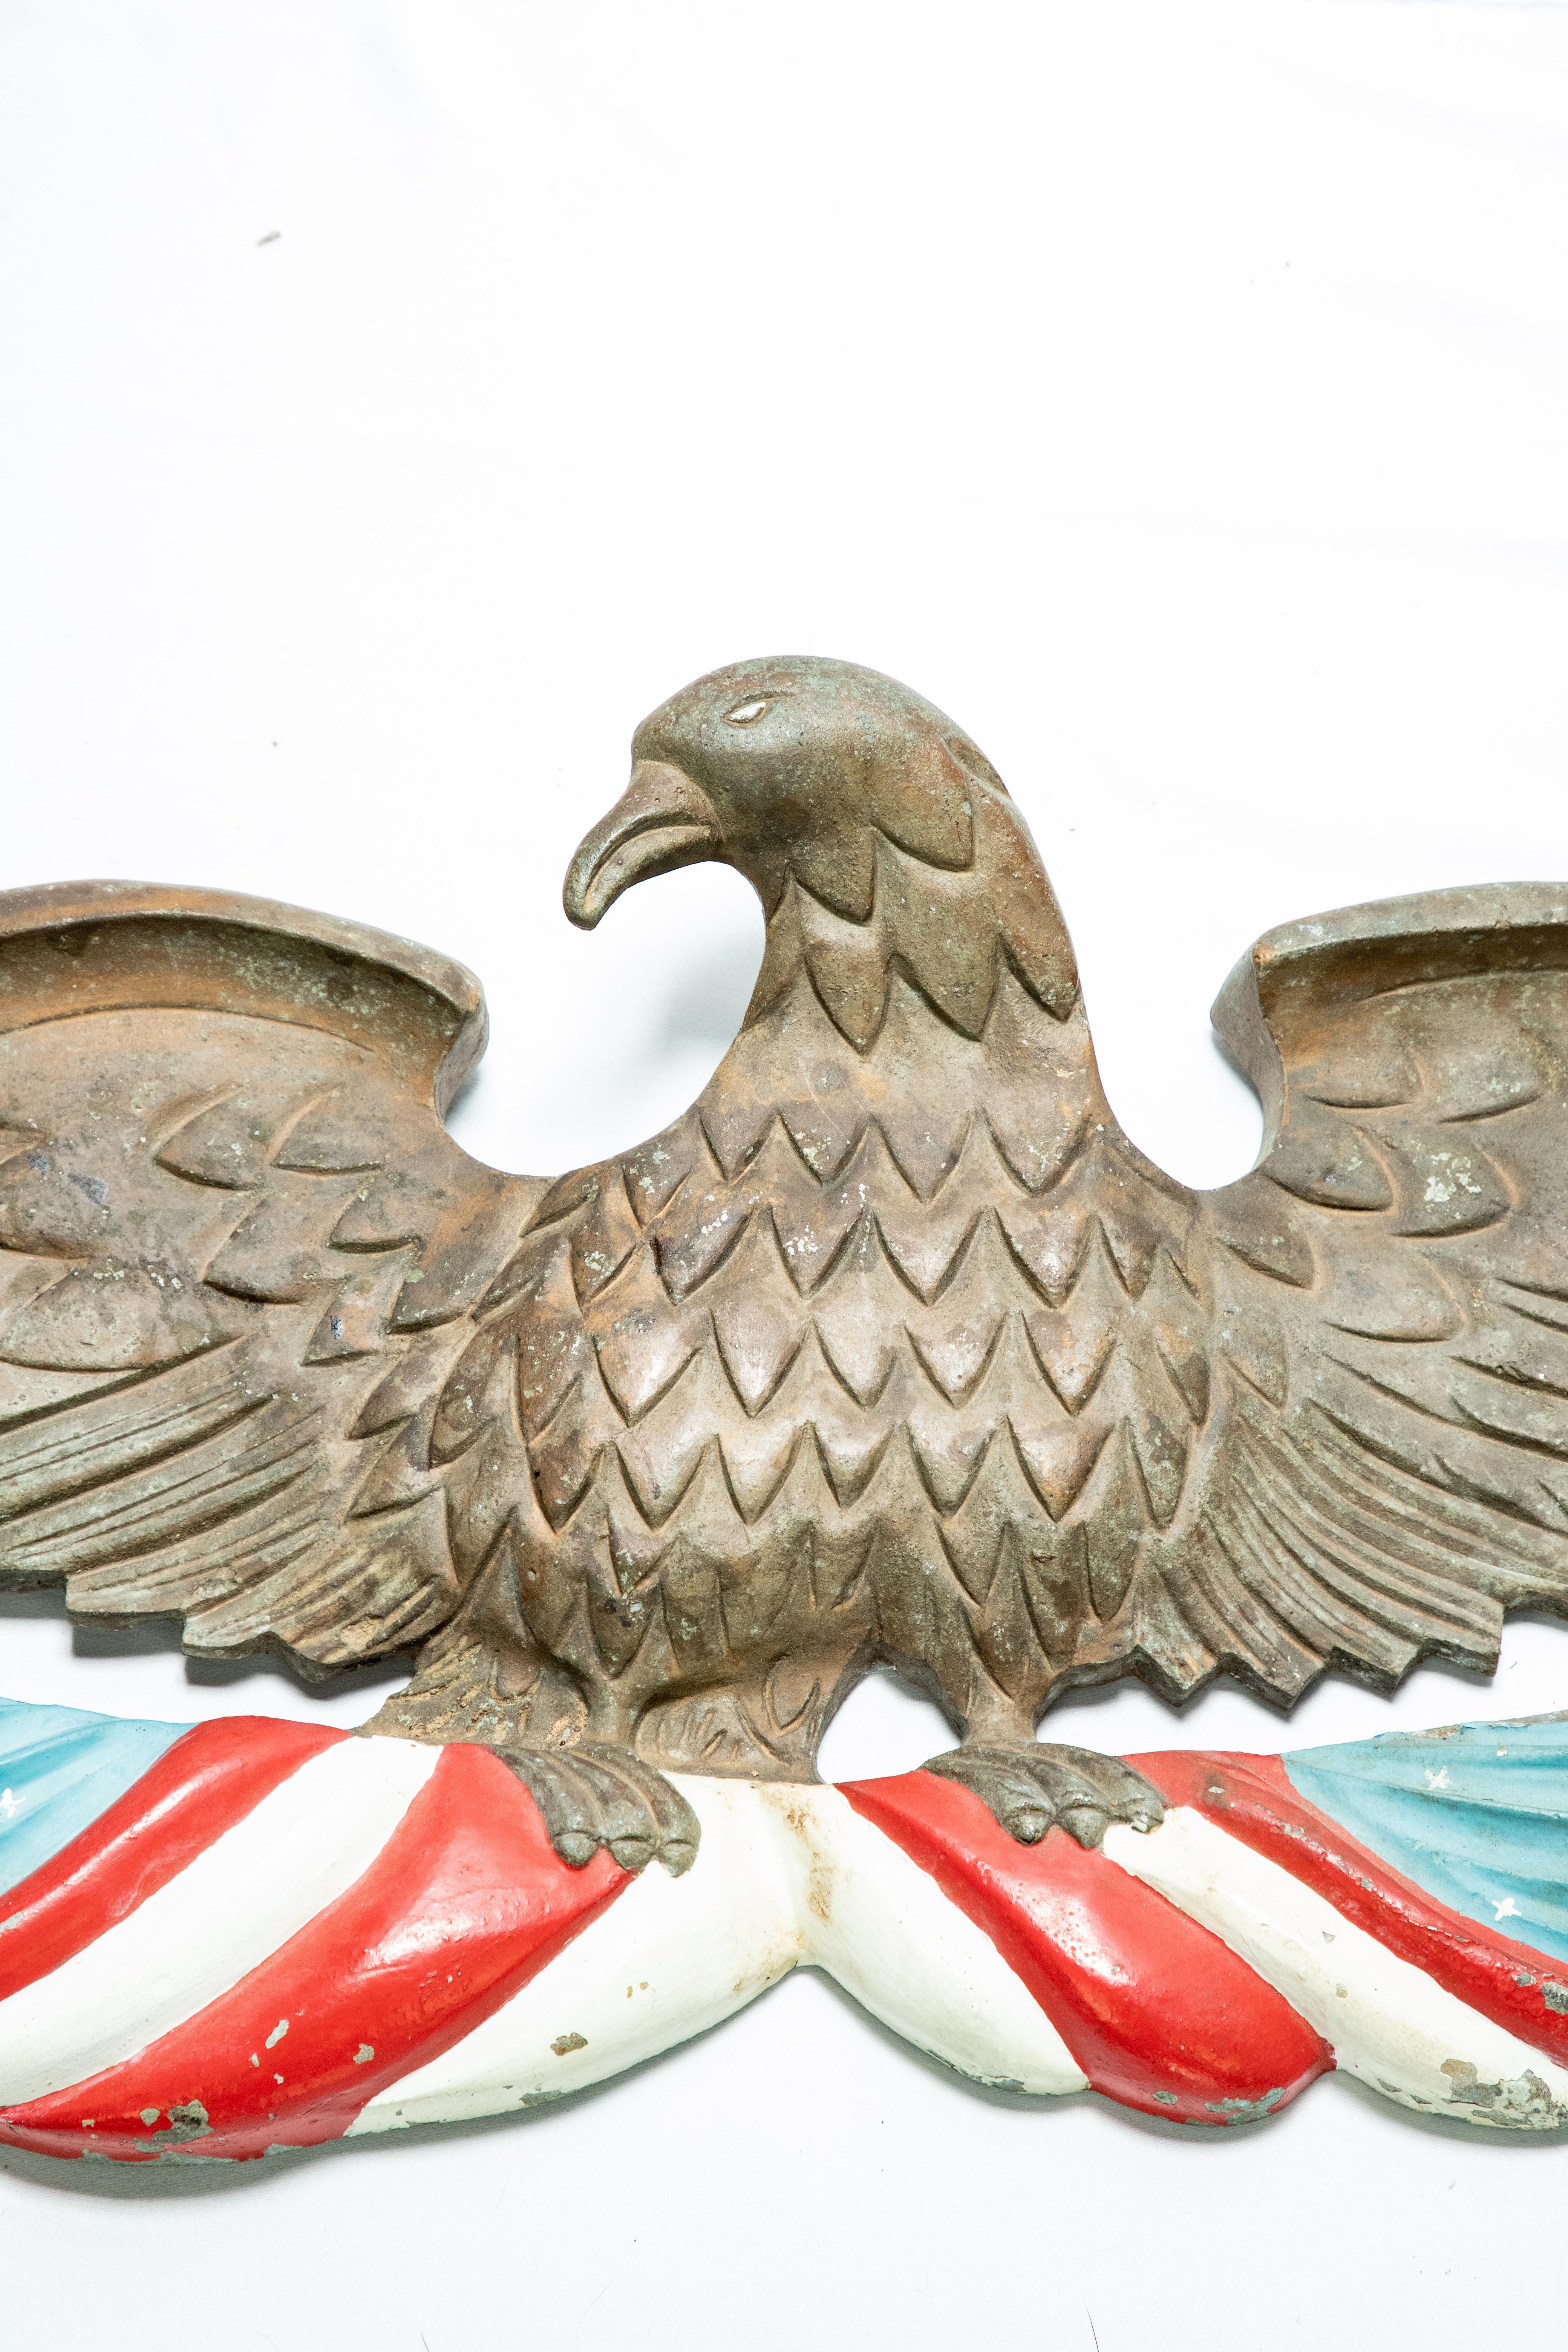 Offering this stunning cast bronze Eagle wall plaque. This eagle spreads its wings and holding in its talons is a red white and blue themed fabric.